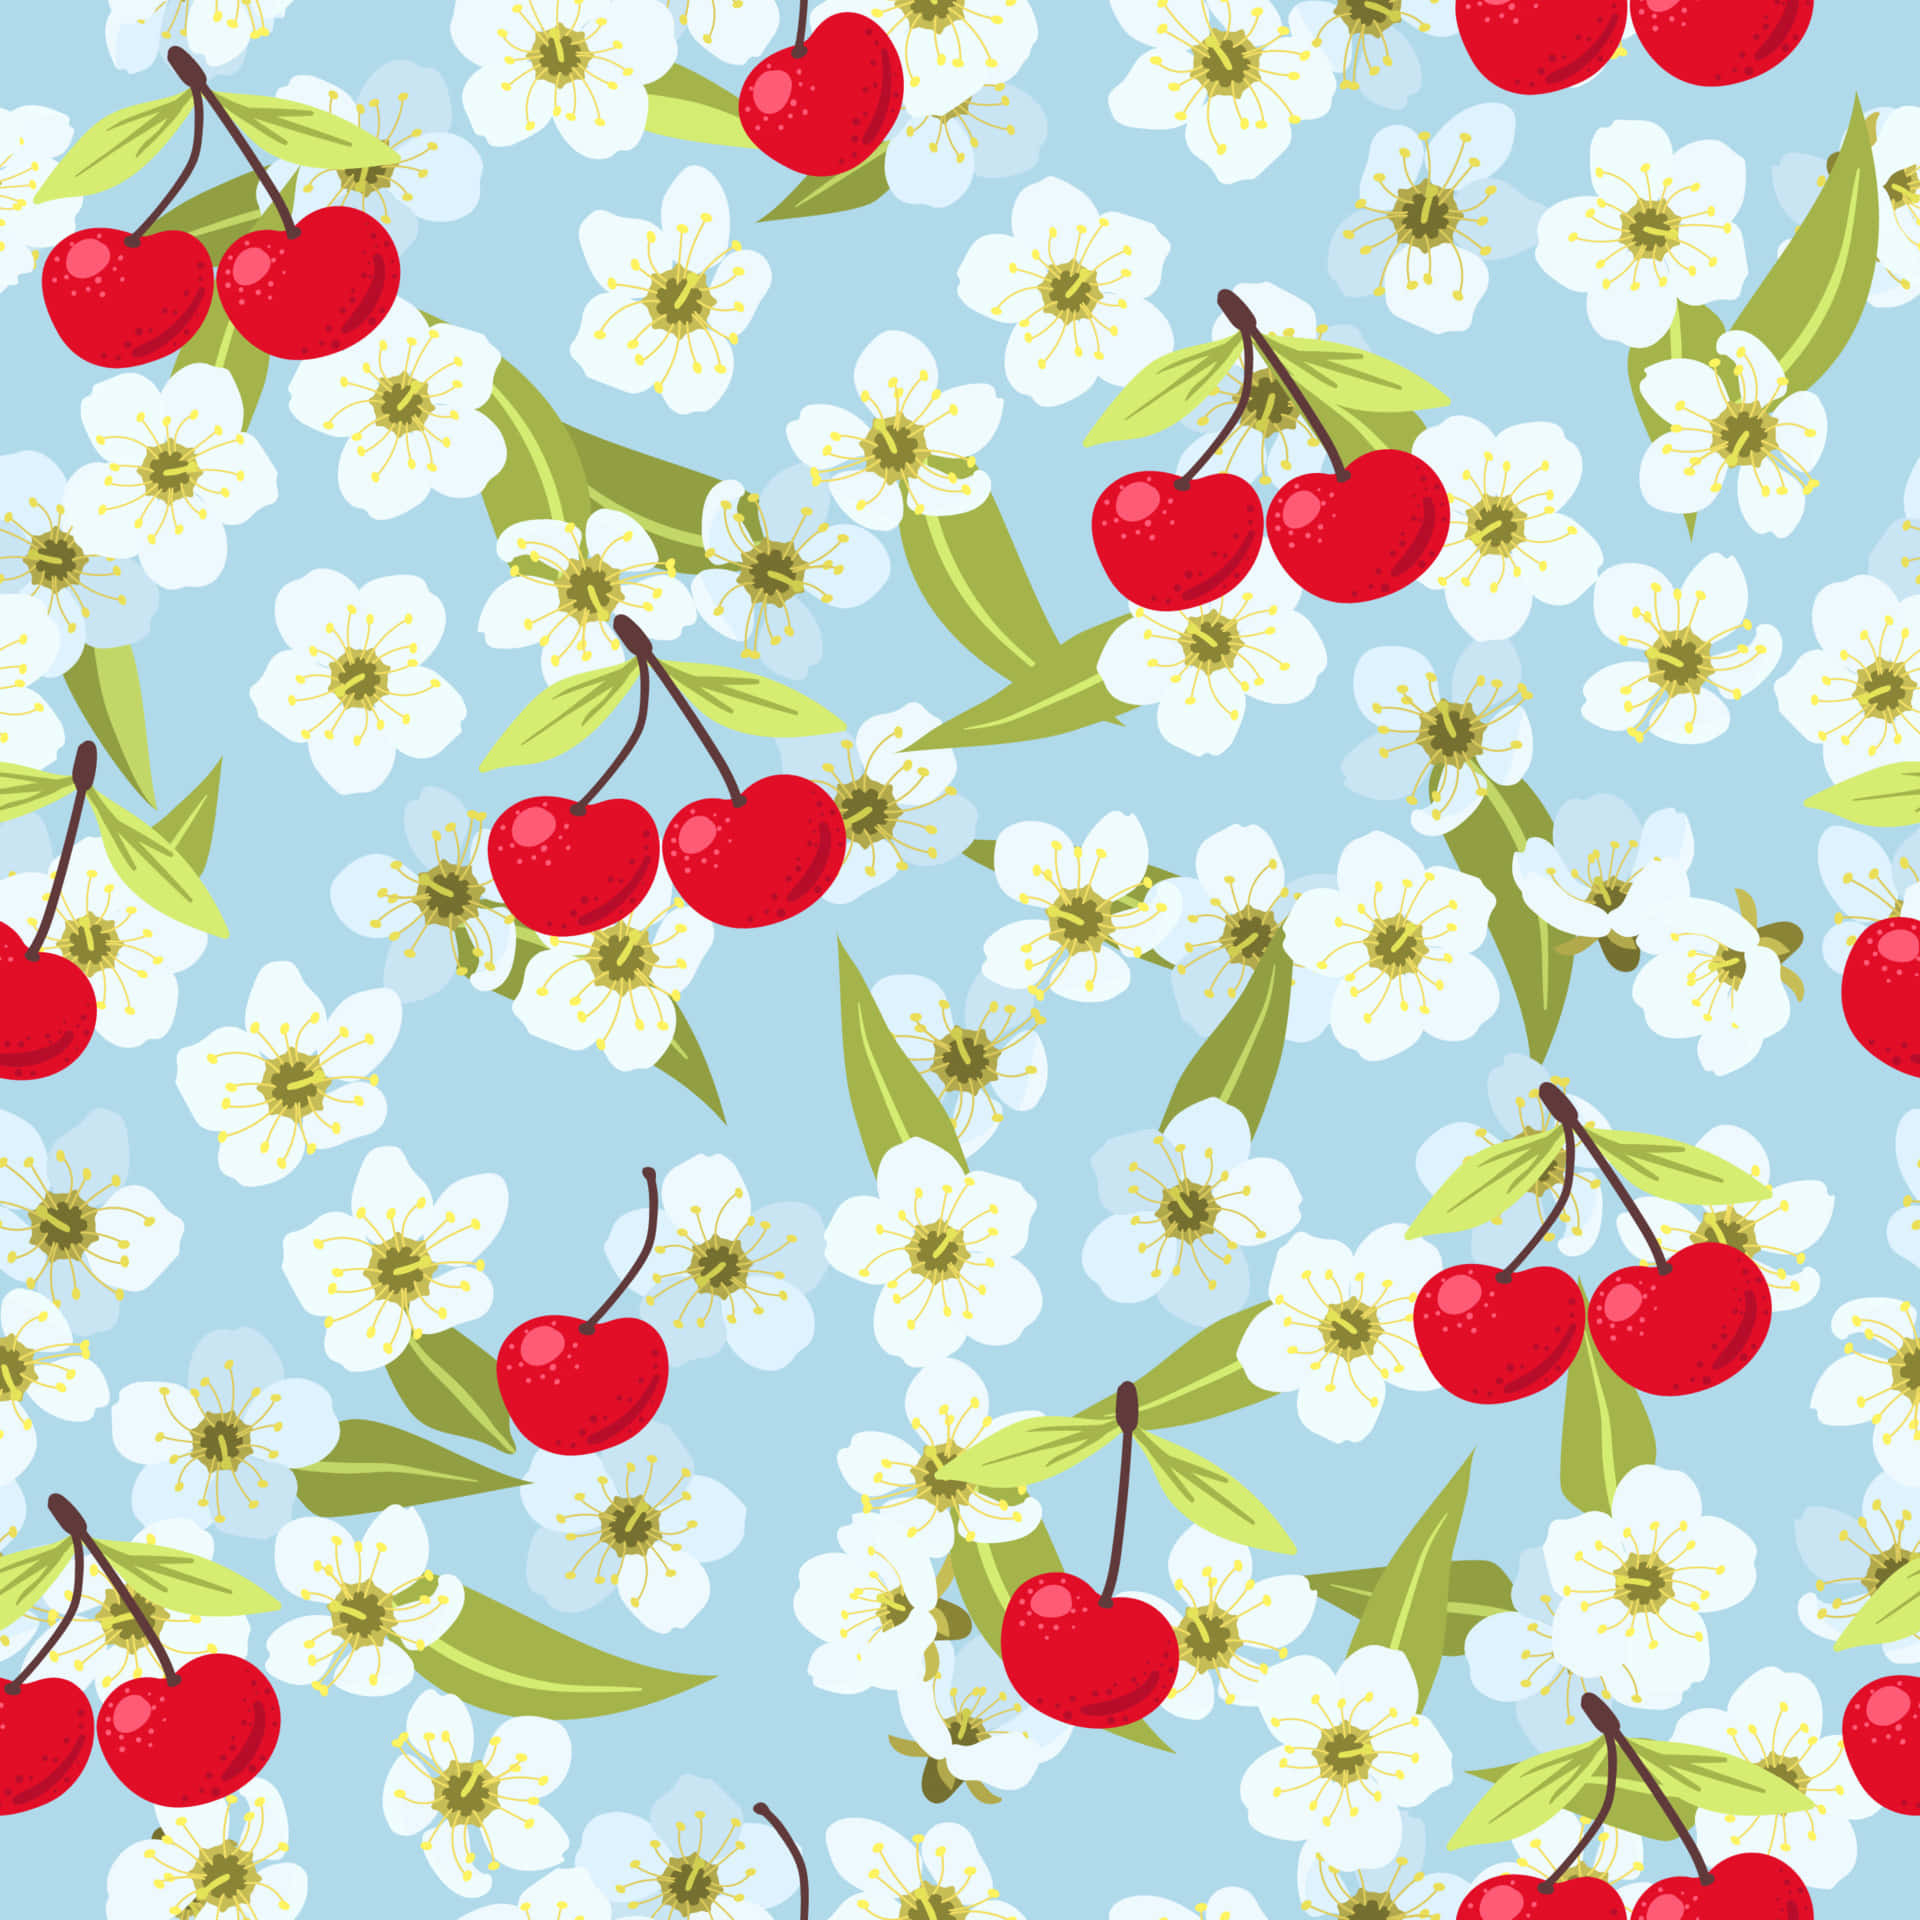 Cute Cherries With White Hibiscus Flowers Wallpaper